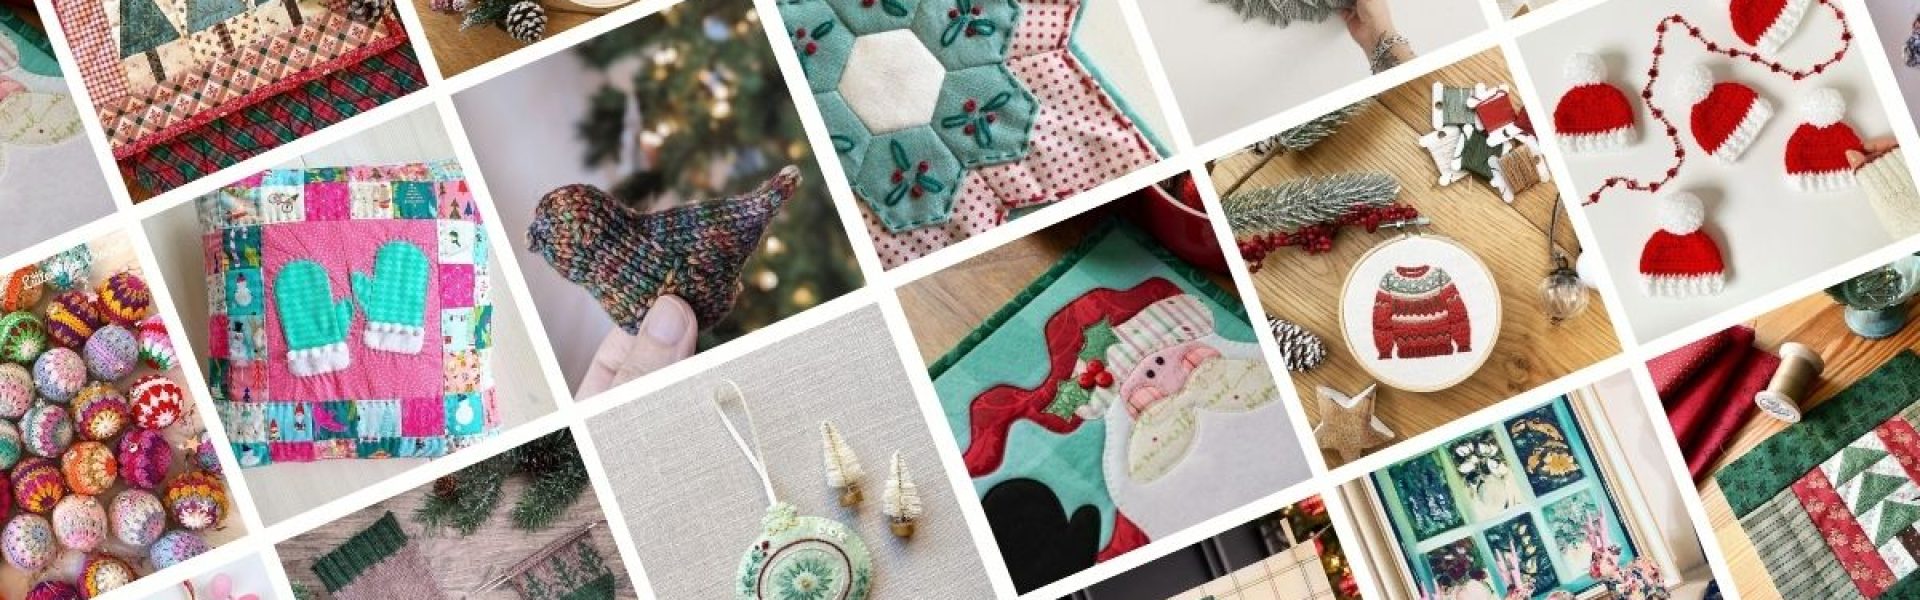 Our FAvourite Christmas Crafts this Winter